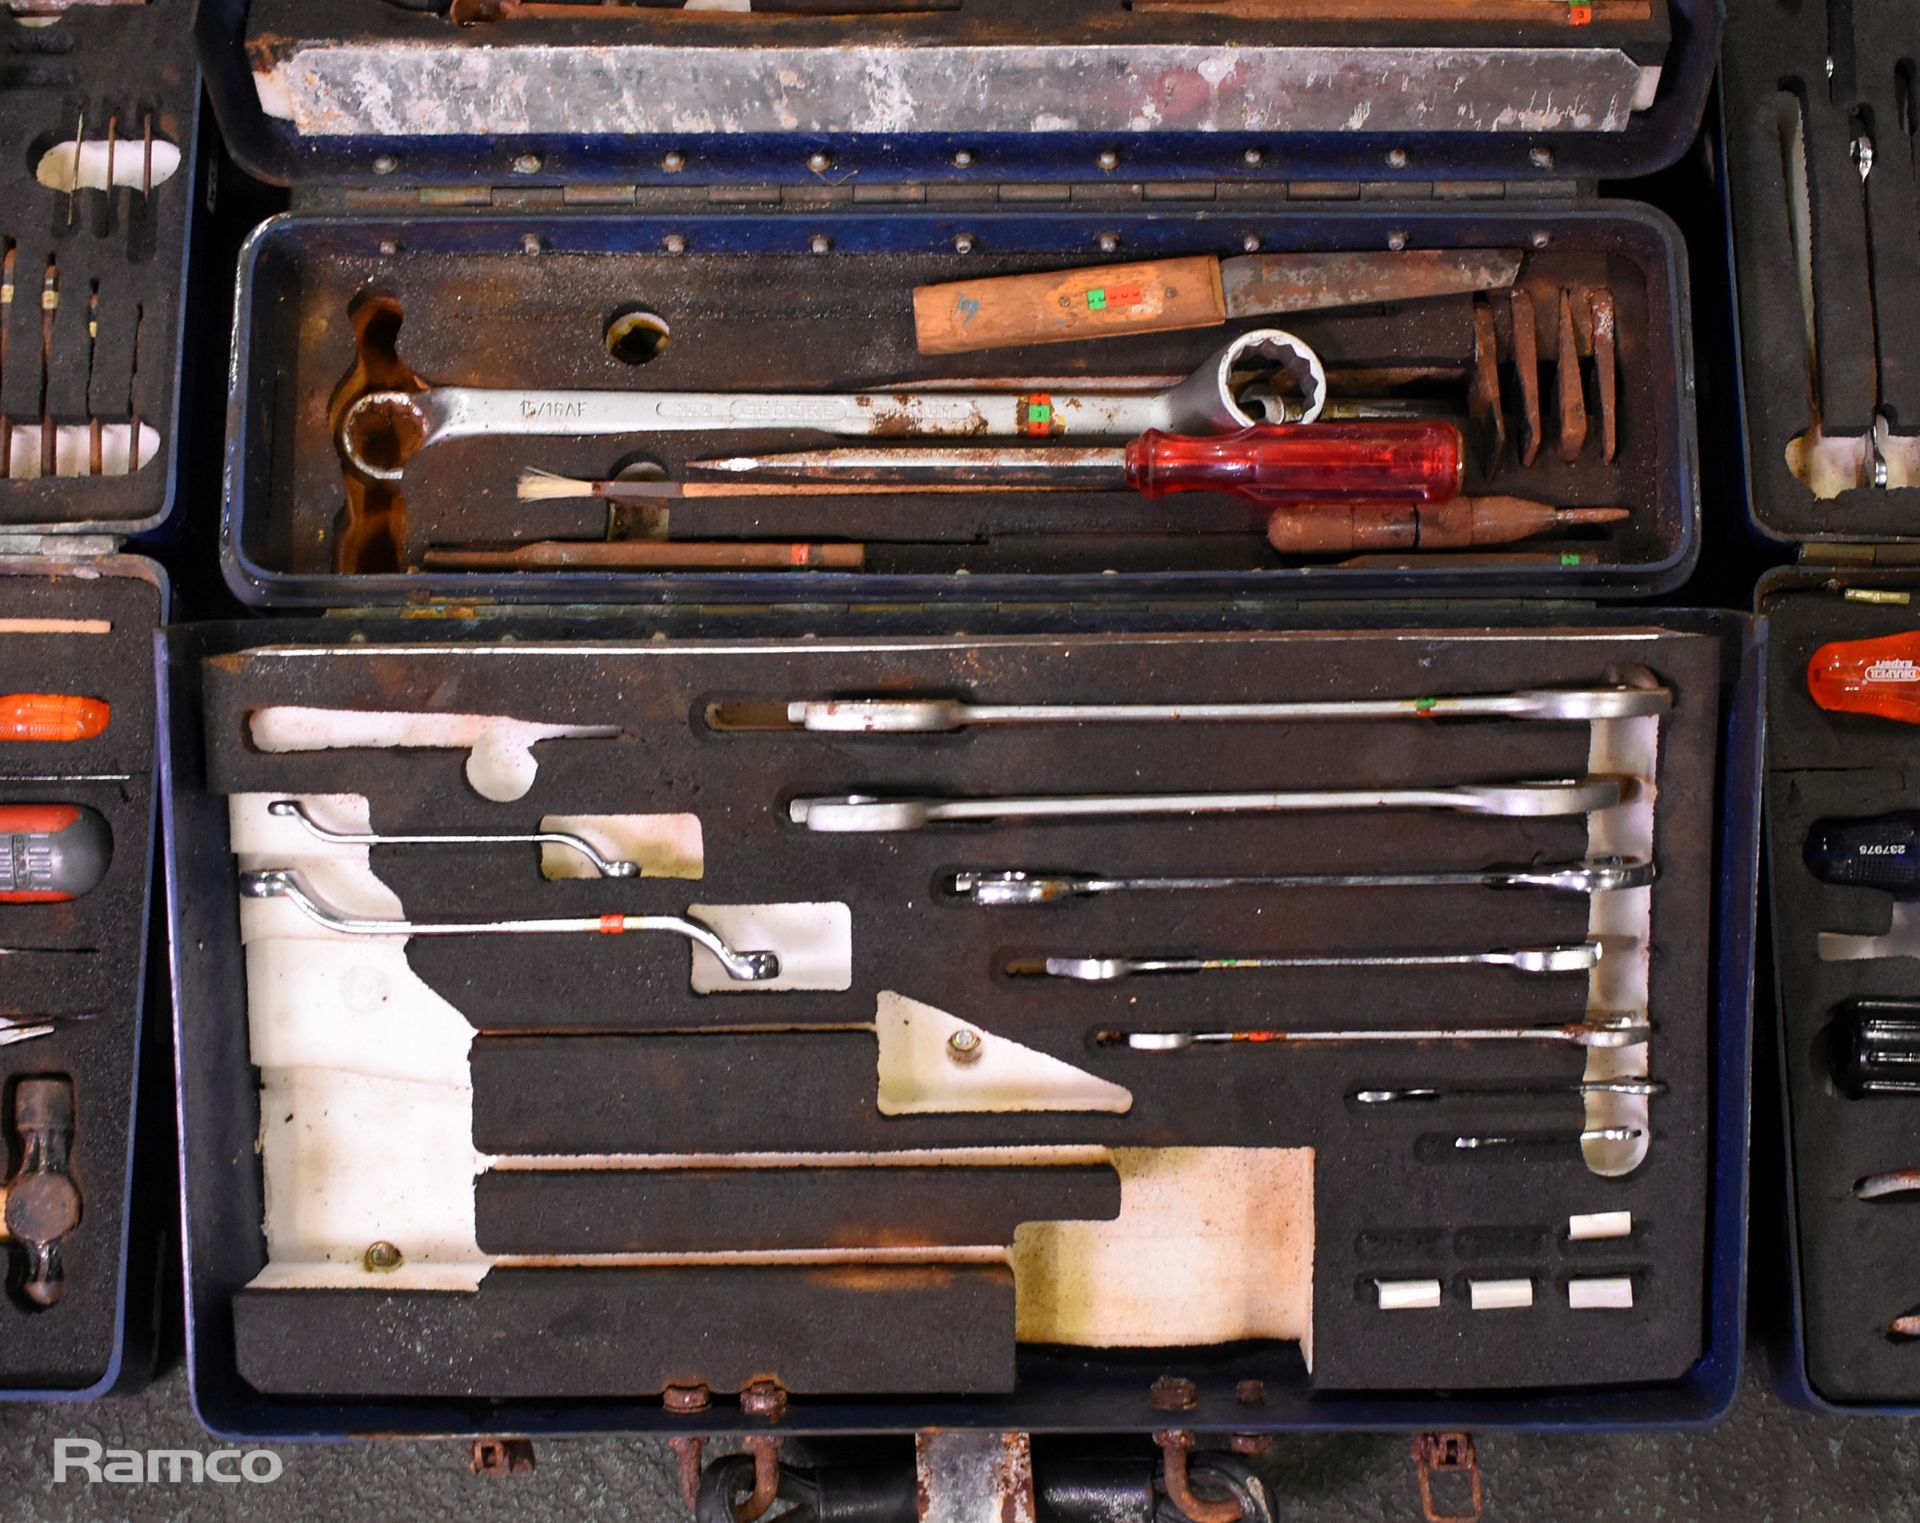 3x Multi piece tool kits in composite case - spanners, screwdrivers, hammer and punches - Image 3 of 7